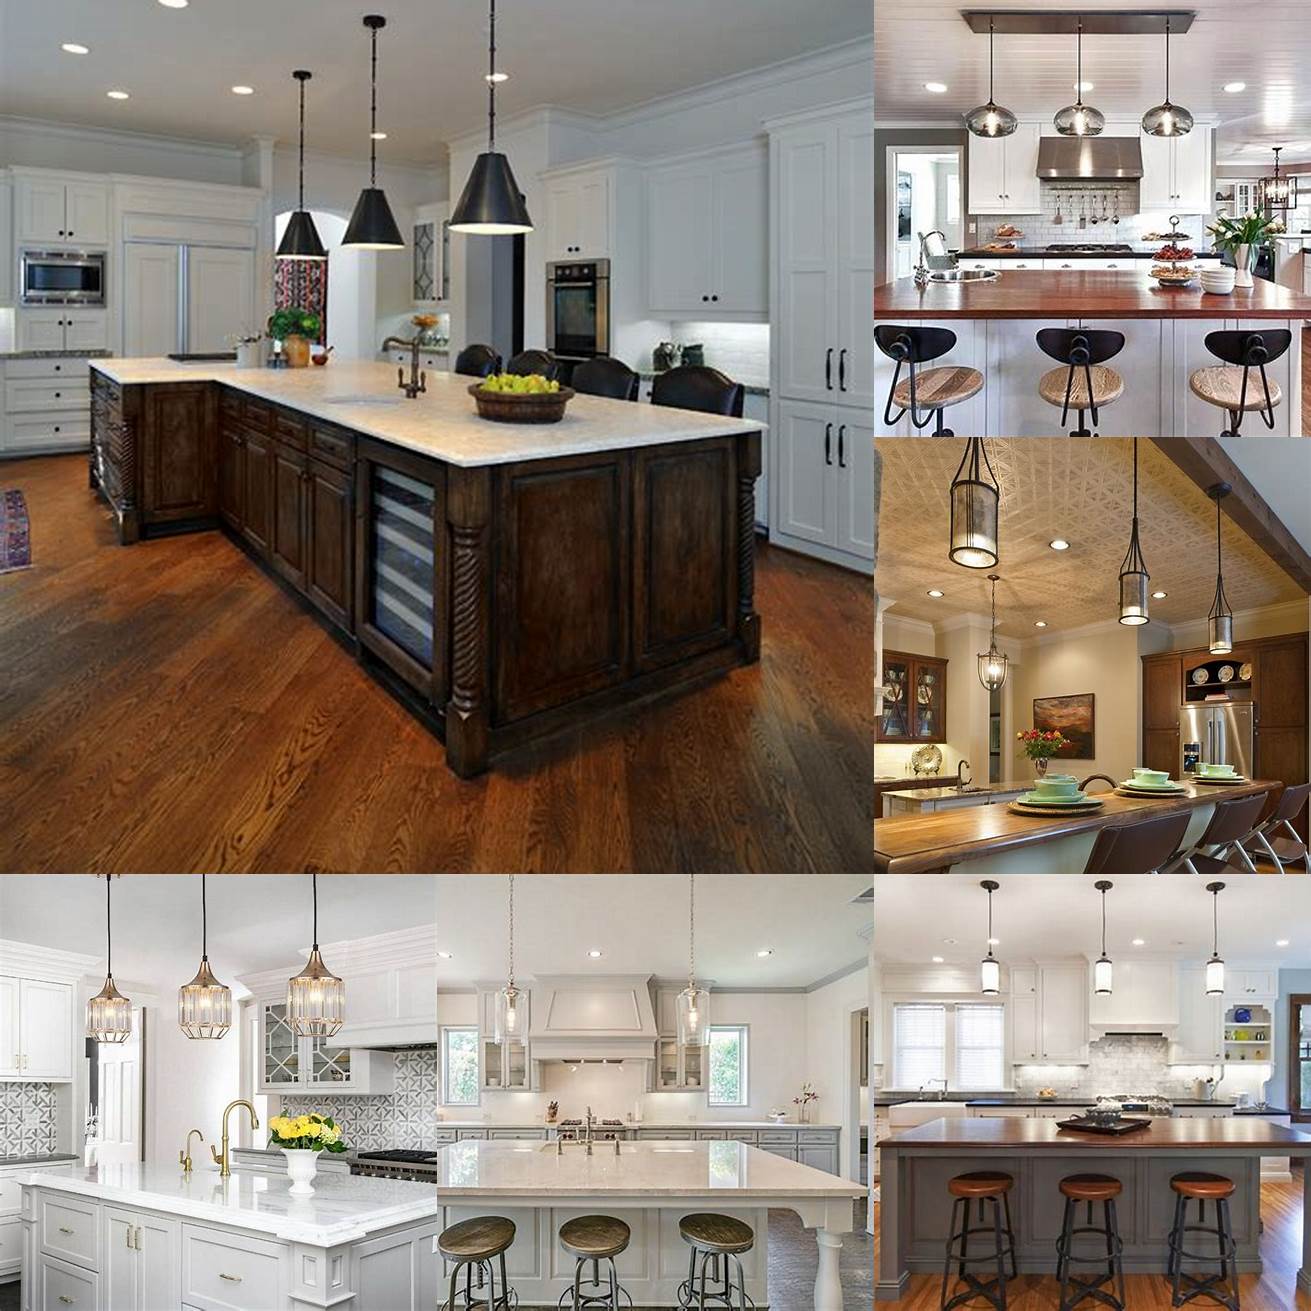 Hang two or three drum pendant lights in a row over your kitchen island